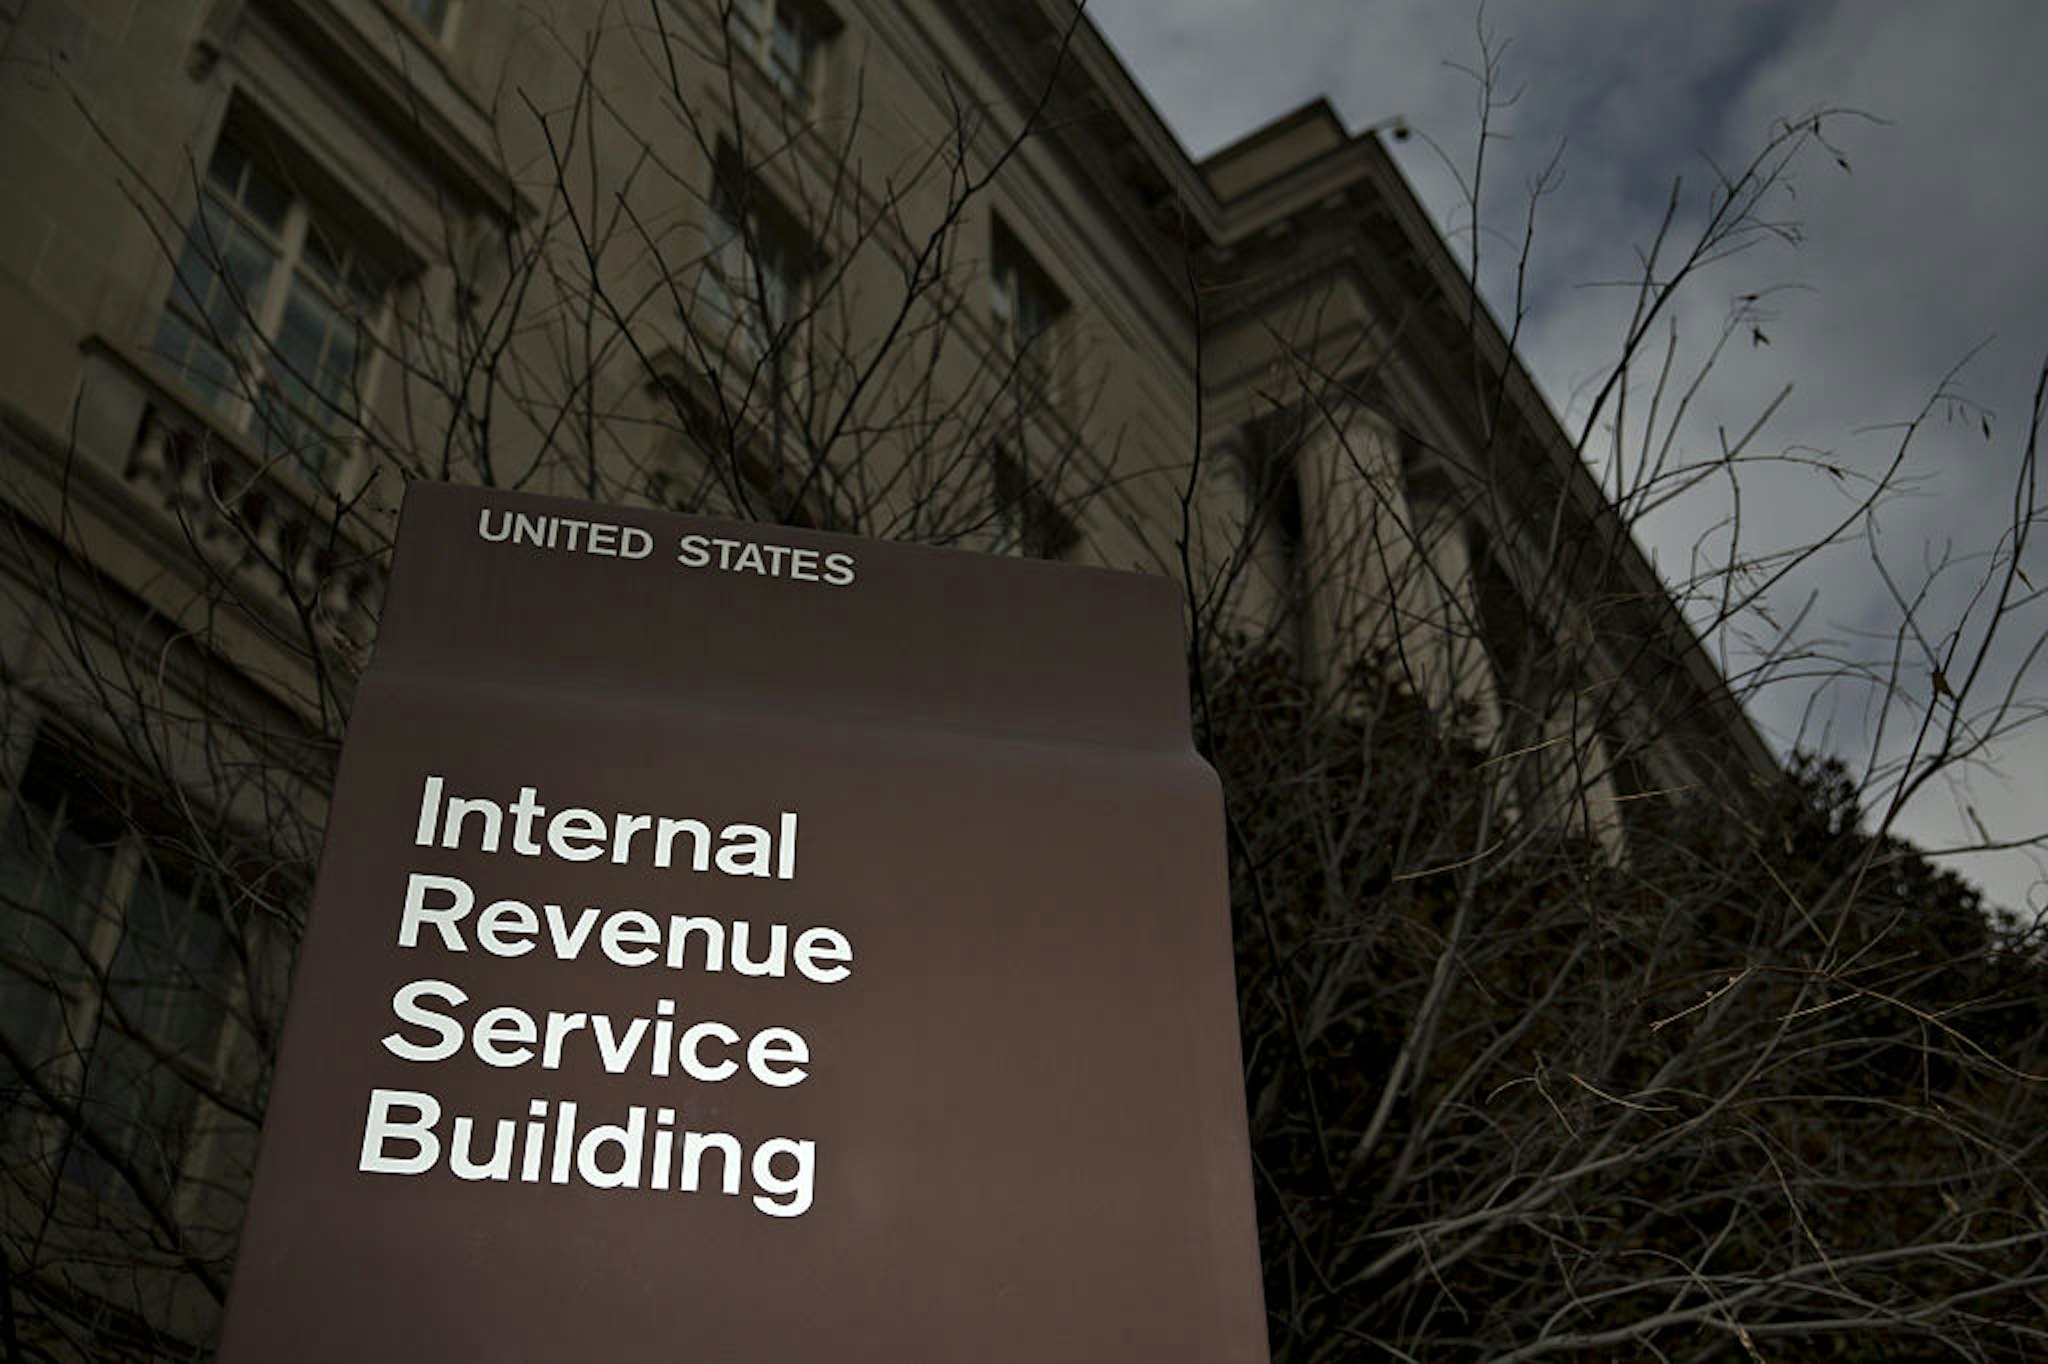 Signage for the Internal Revenue Service (IRS) stands outside the IRS headquarters building in Washington, D.C., U.S., on Wednesday, Feb. 17, 2016. Taxpayers have until Monday, April 18 to file their 2015 tax returns and pay any tax owed.